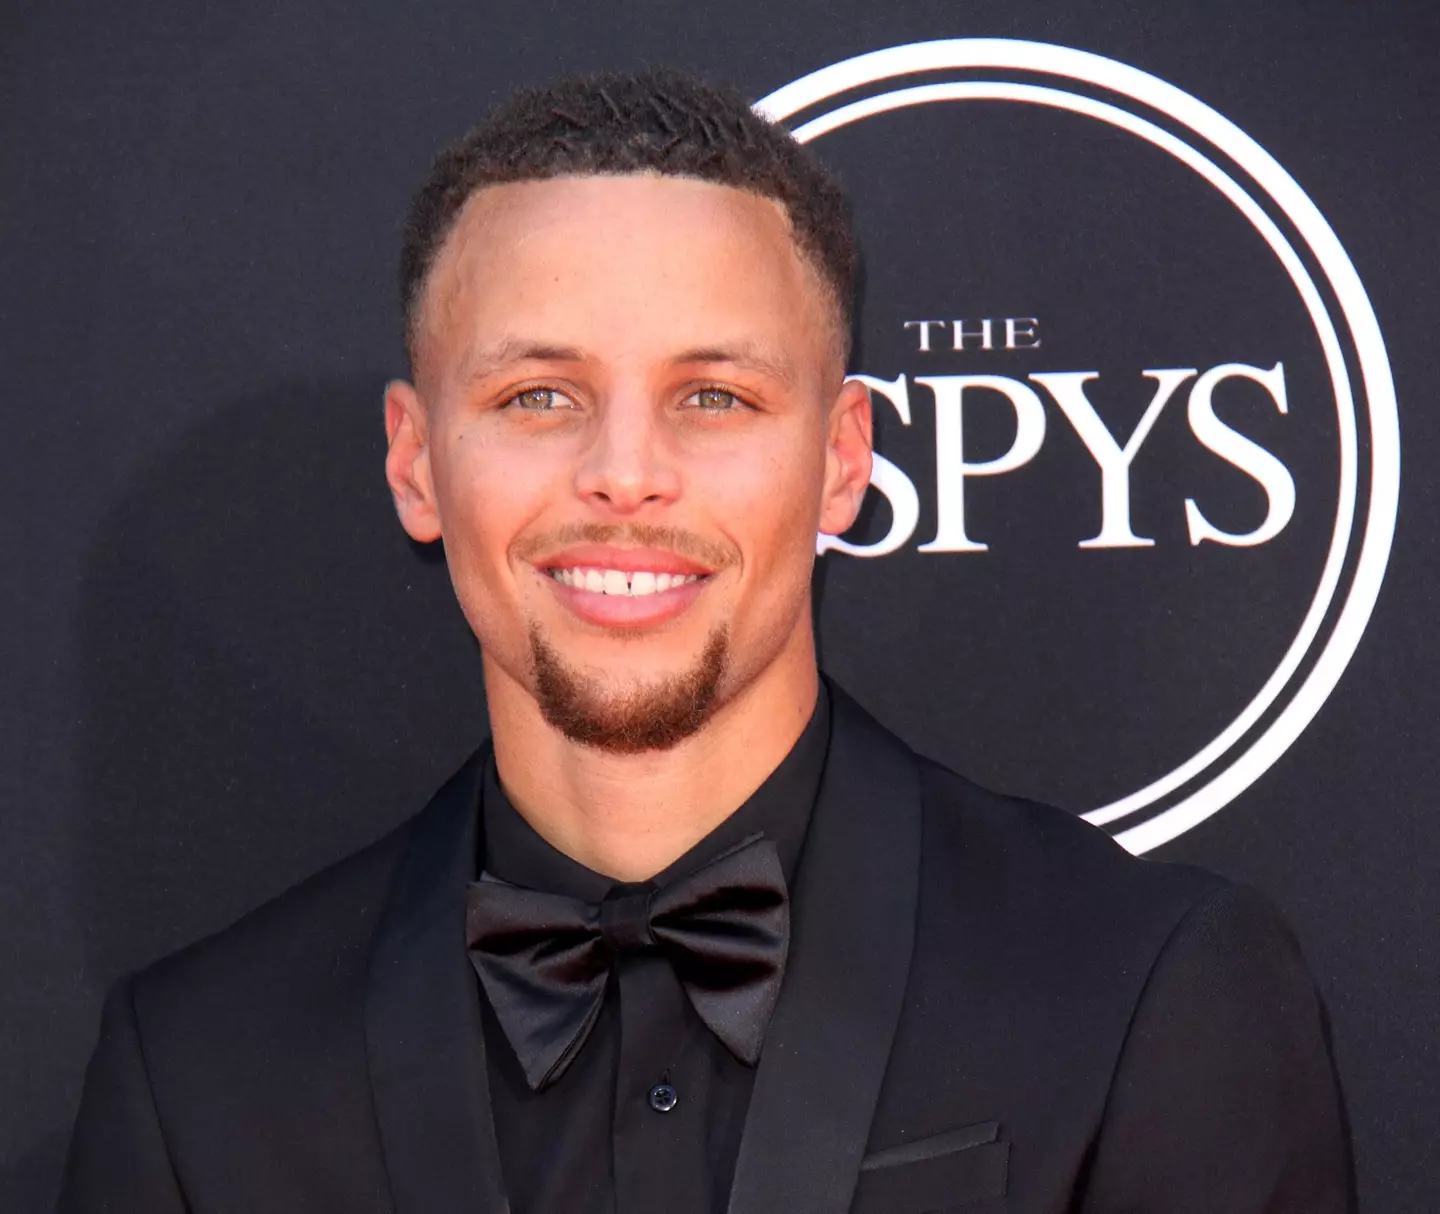 Steph Curry was also named.